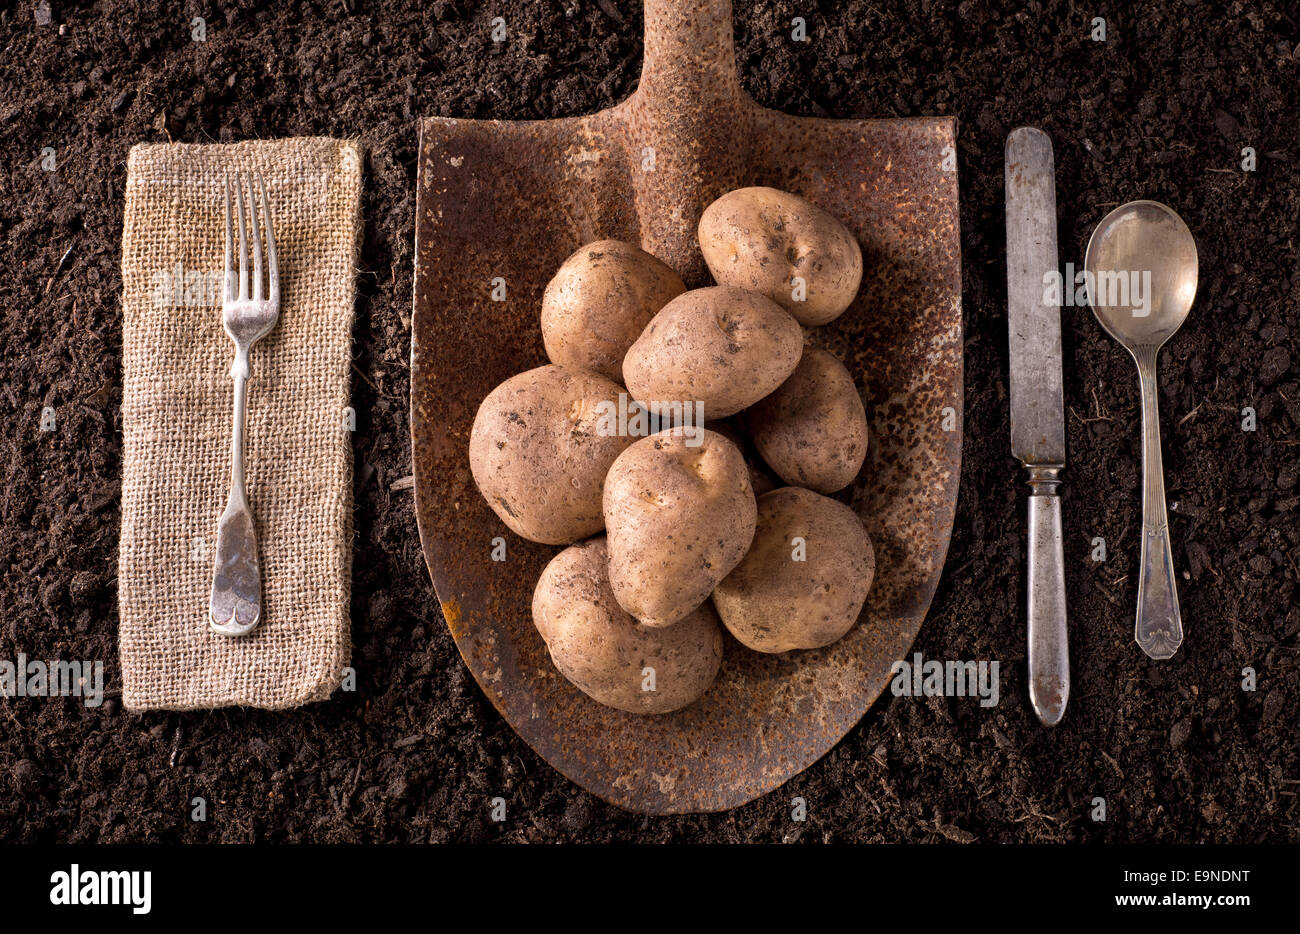 Organic farm to table healthy eating concept on soil background. Stock Photo